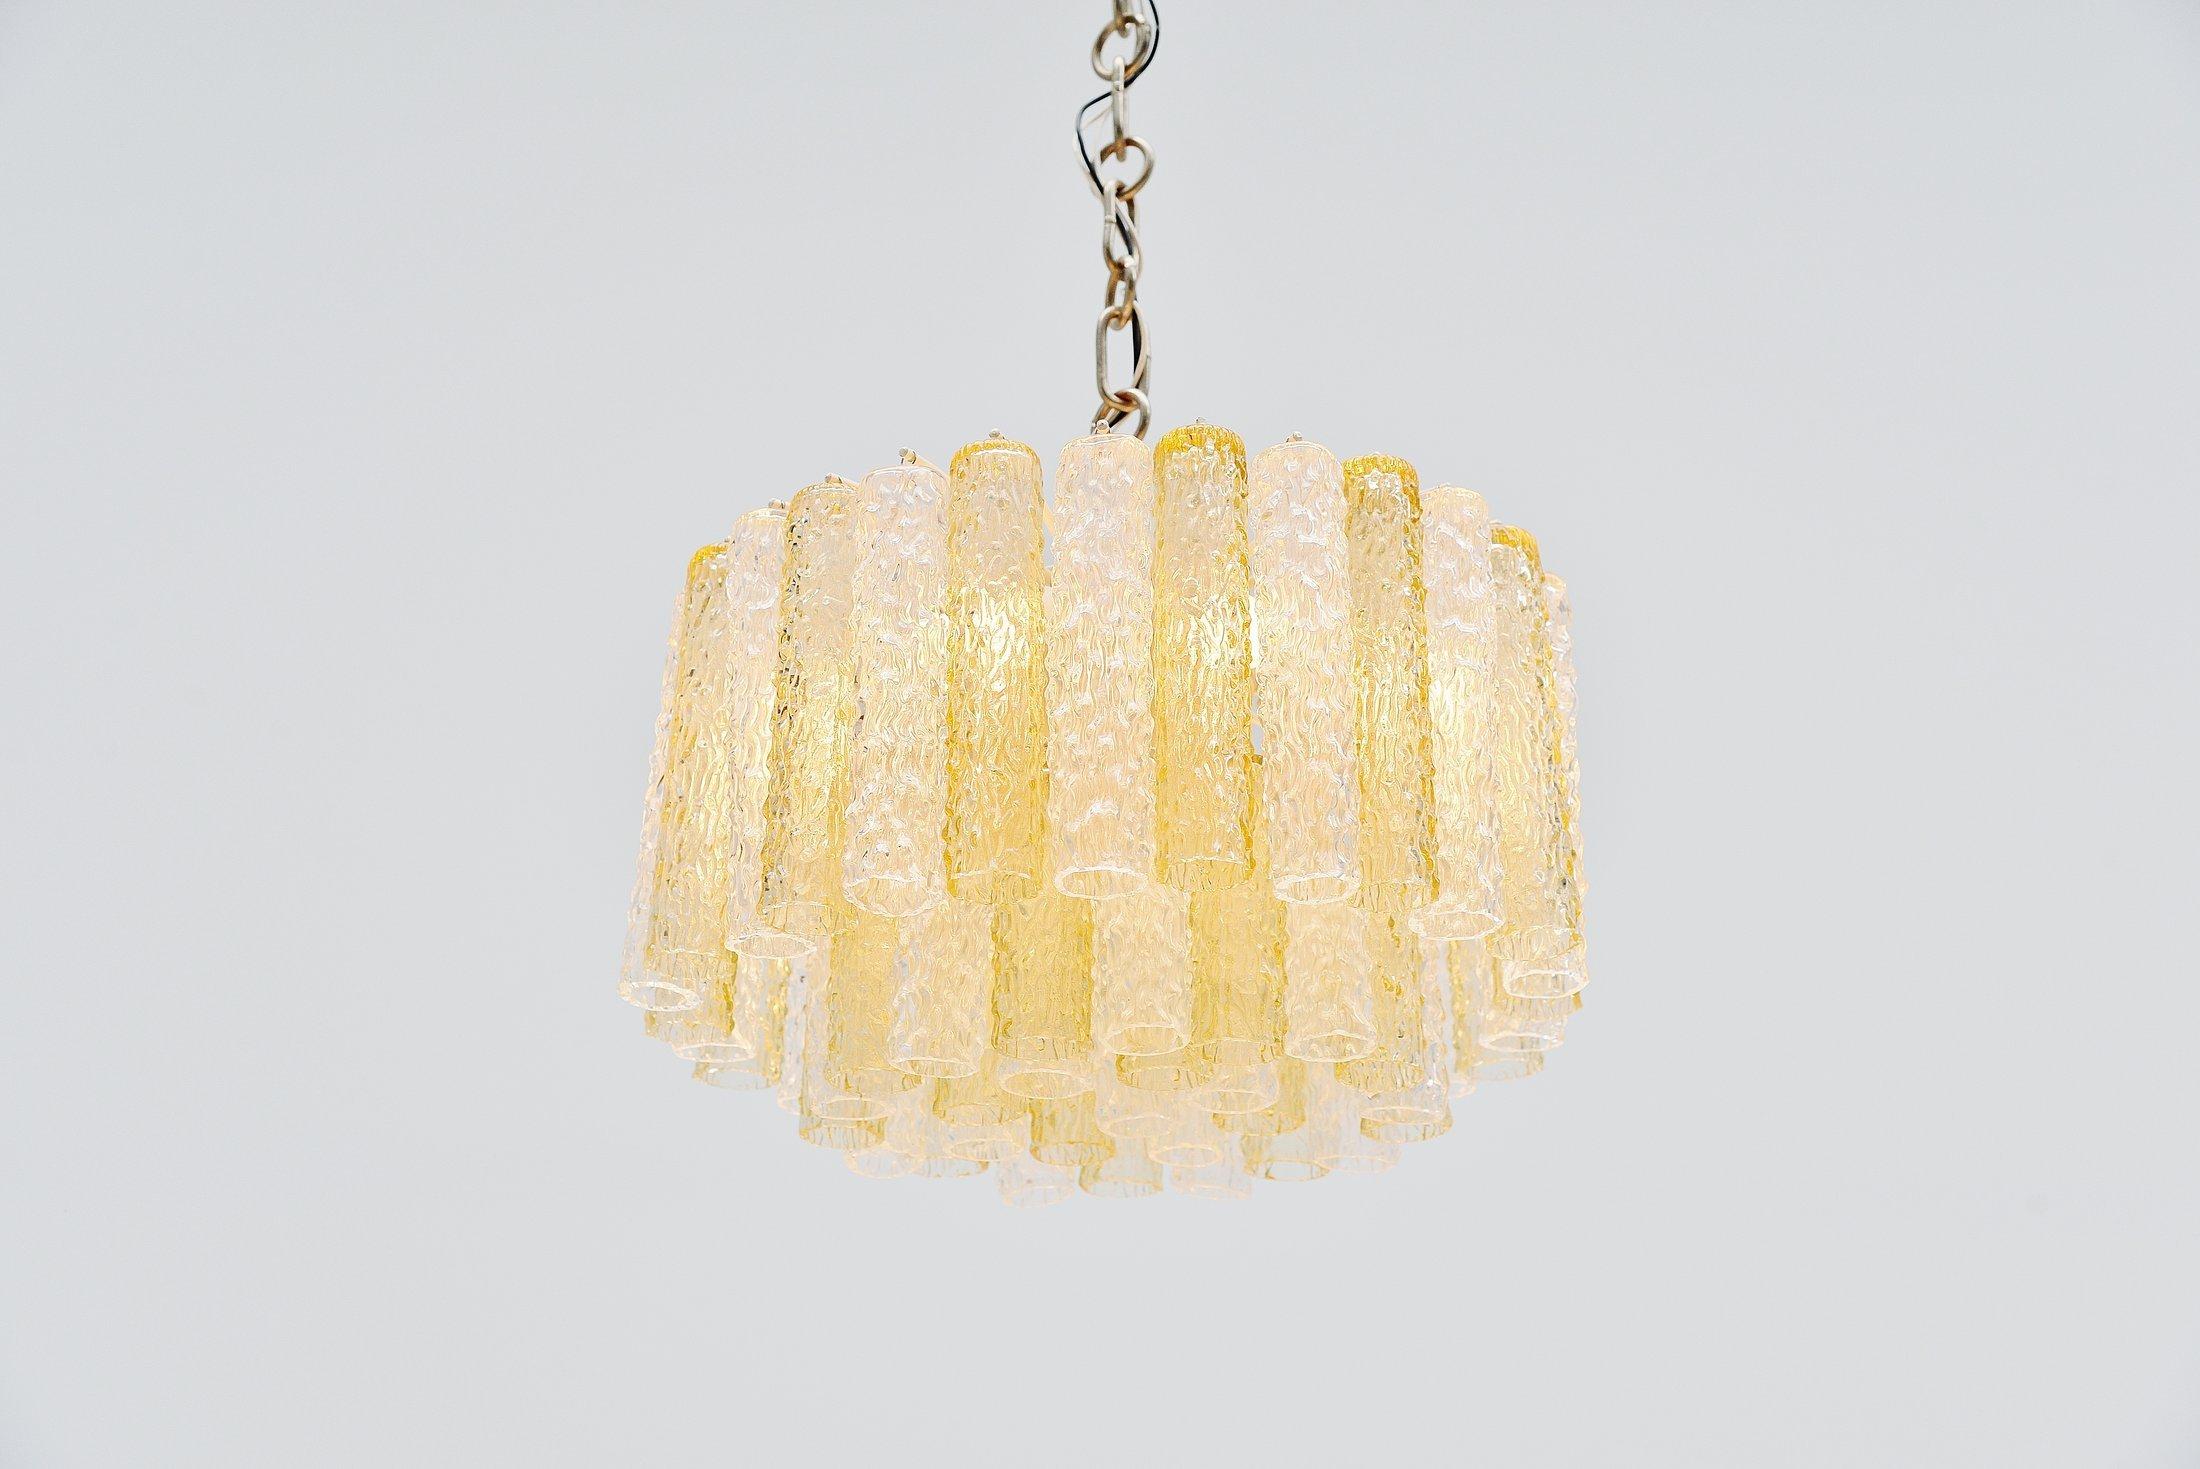 Fantastic chandelier designed by Paolo Venini and manufactured by Venini, Murano Italy 1960. This chandelier has 55 ice look glass tubed pegs in clear and yellow glass hanging on a white painted metal frame. The lamp uses 10x E14 bulbs up to 25